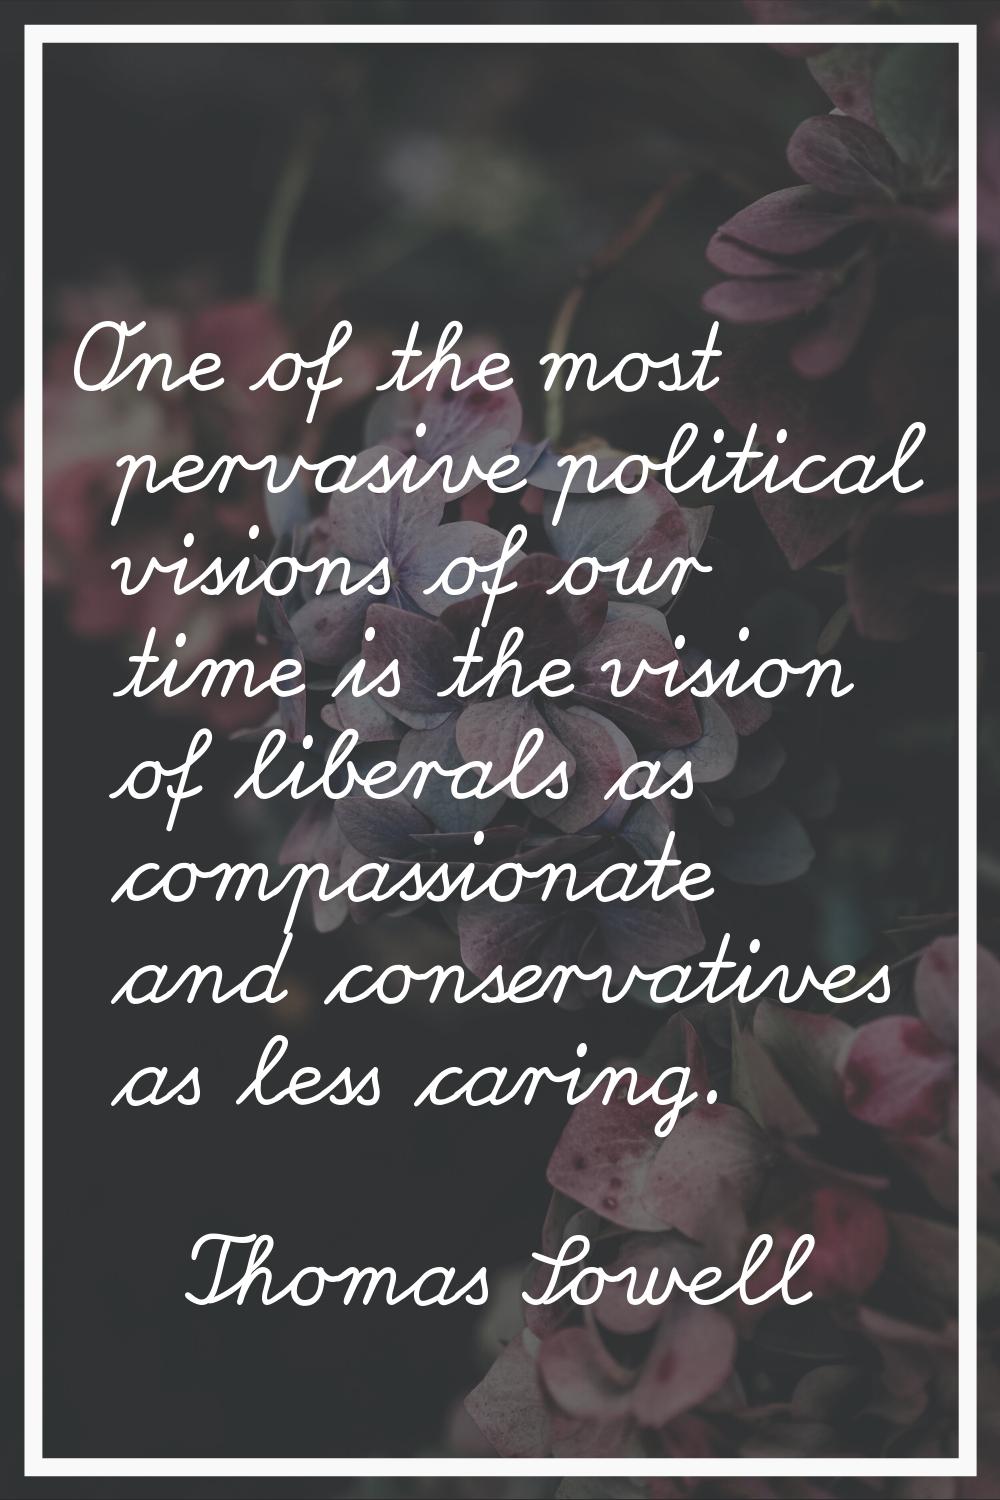 One of the most pervasive political visions of our time is the vision of liberals as compassionate 